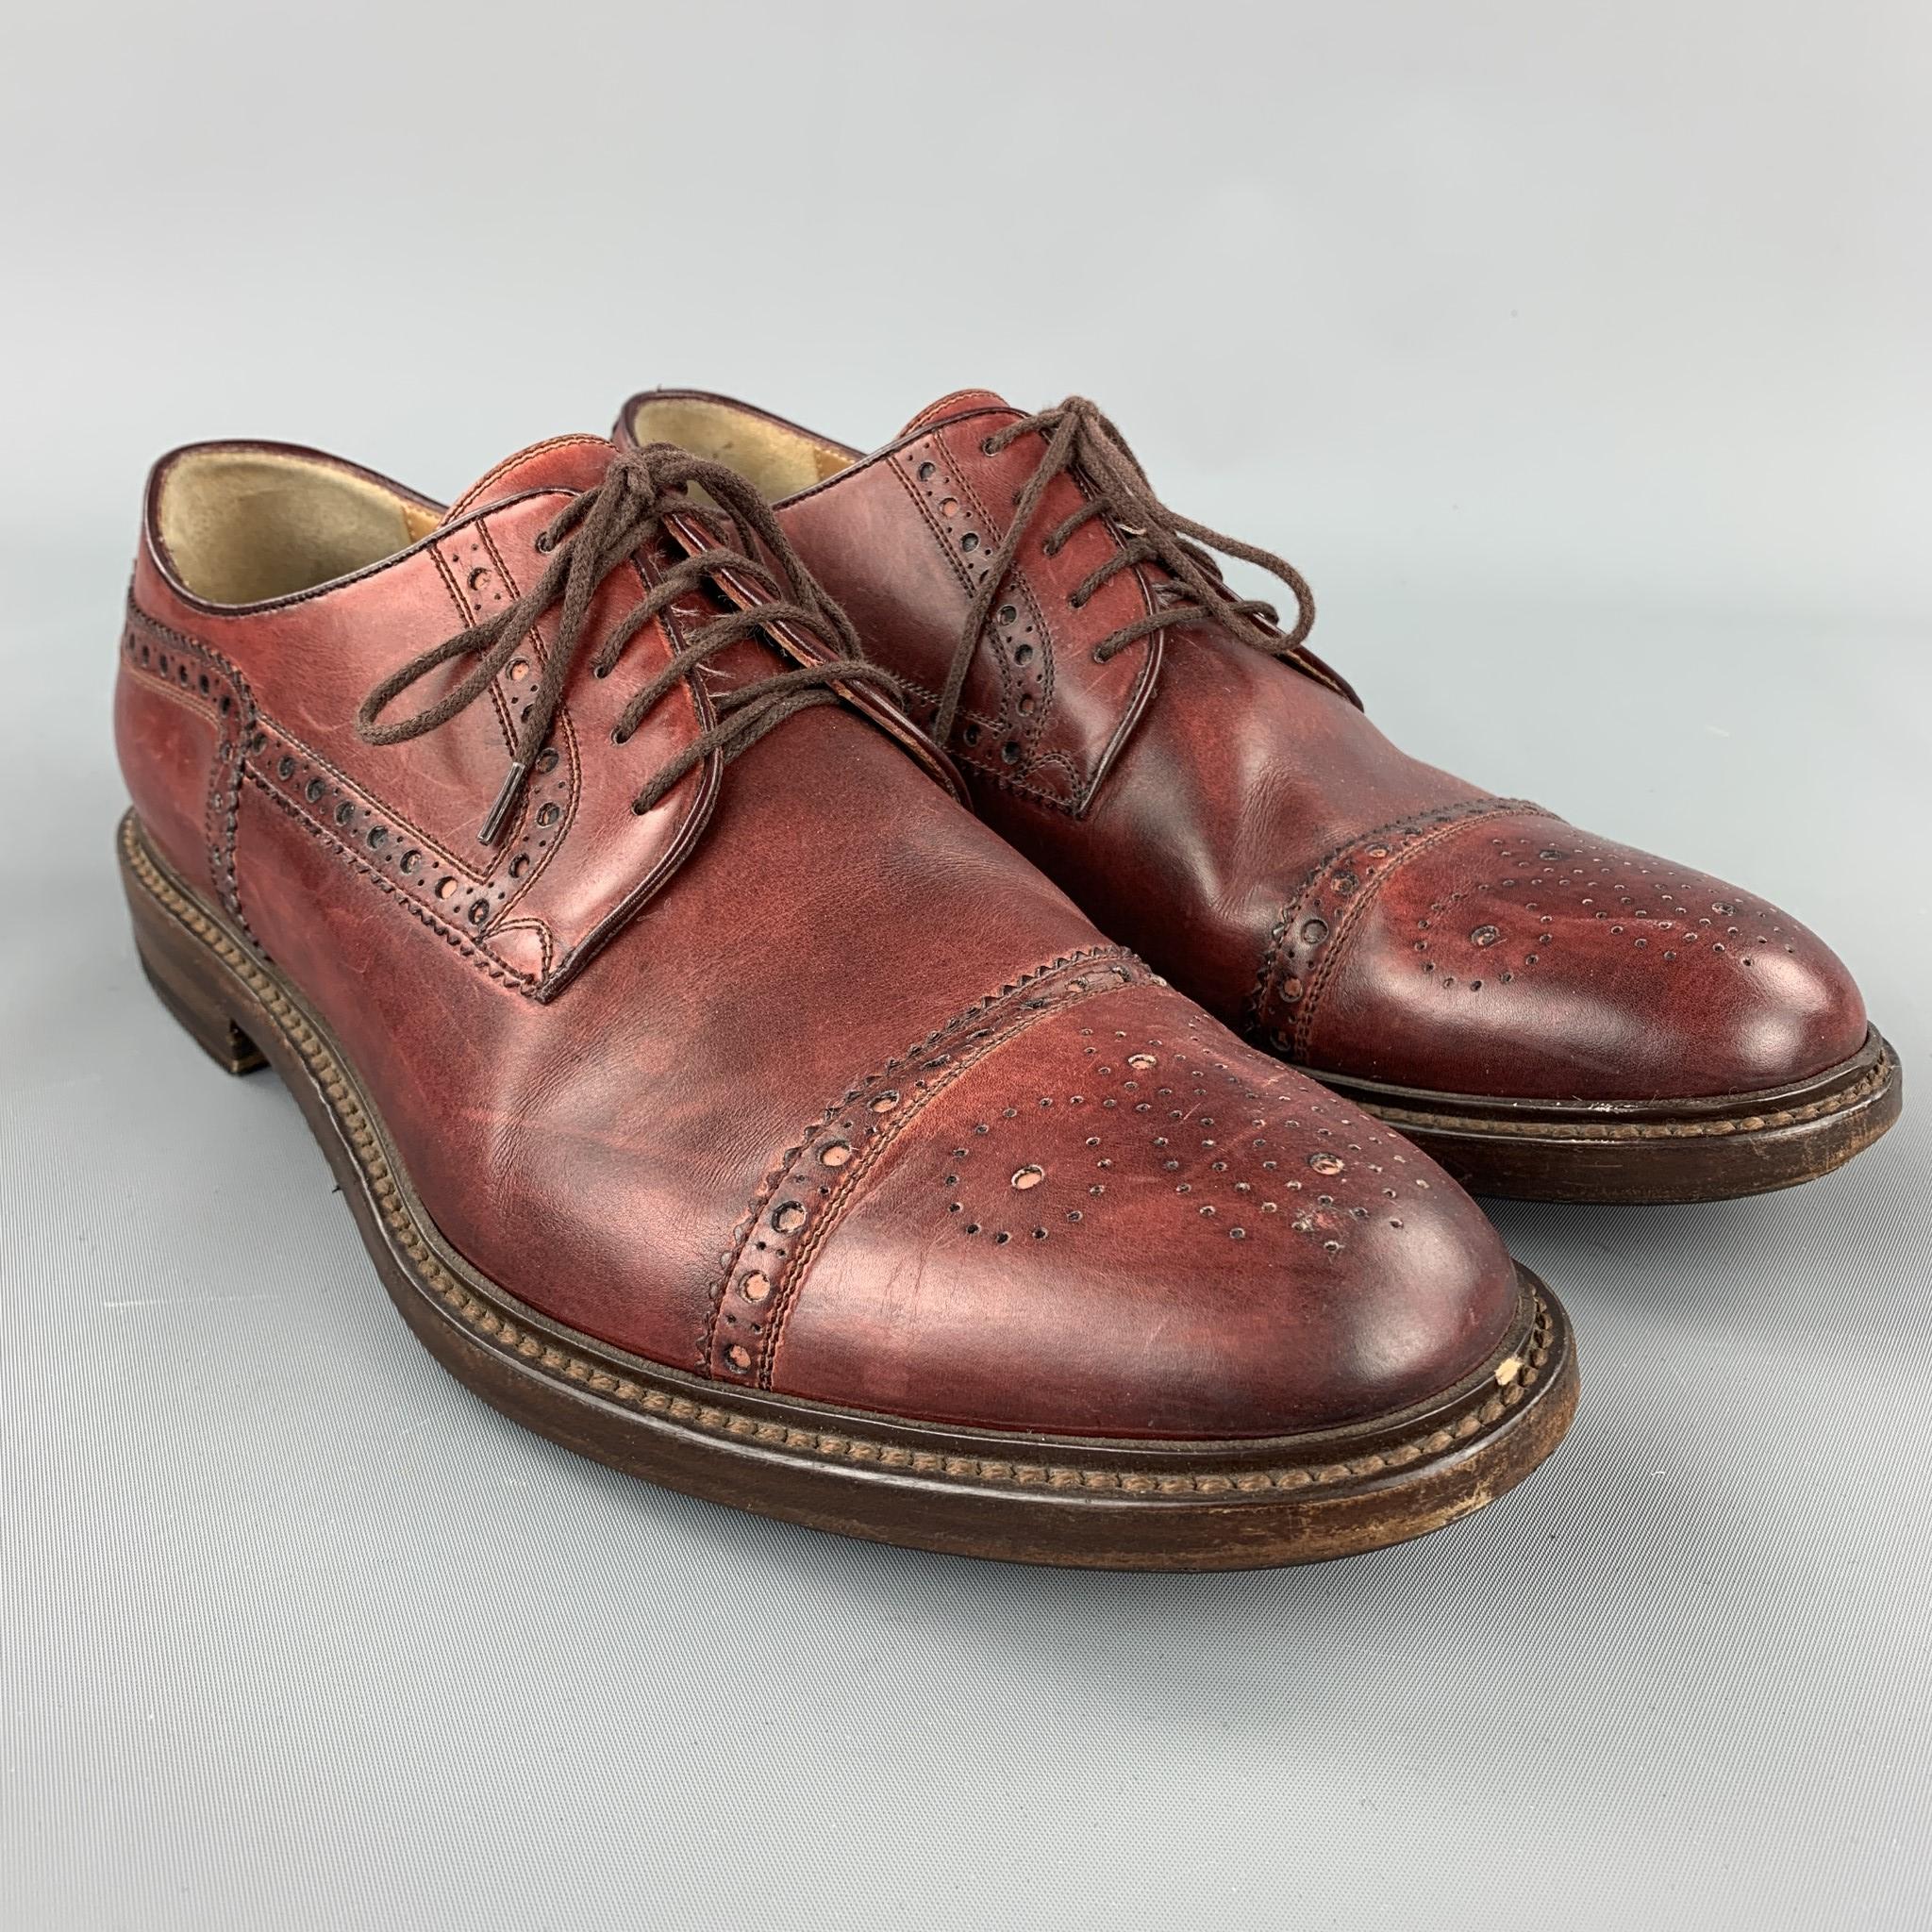 GUCCI lace up shoes comes in a burgundy perforated leather featuring a cap toe and a wooden and a wooden heel. As-Is. Made in Italy.

Very Good Pre-Owned Condition.
Marked: 8.5 

Measurements:

11.5 in. x 4 in. 